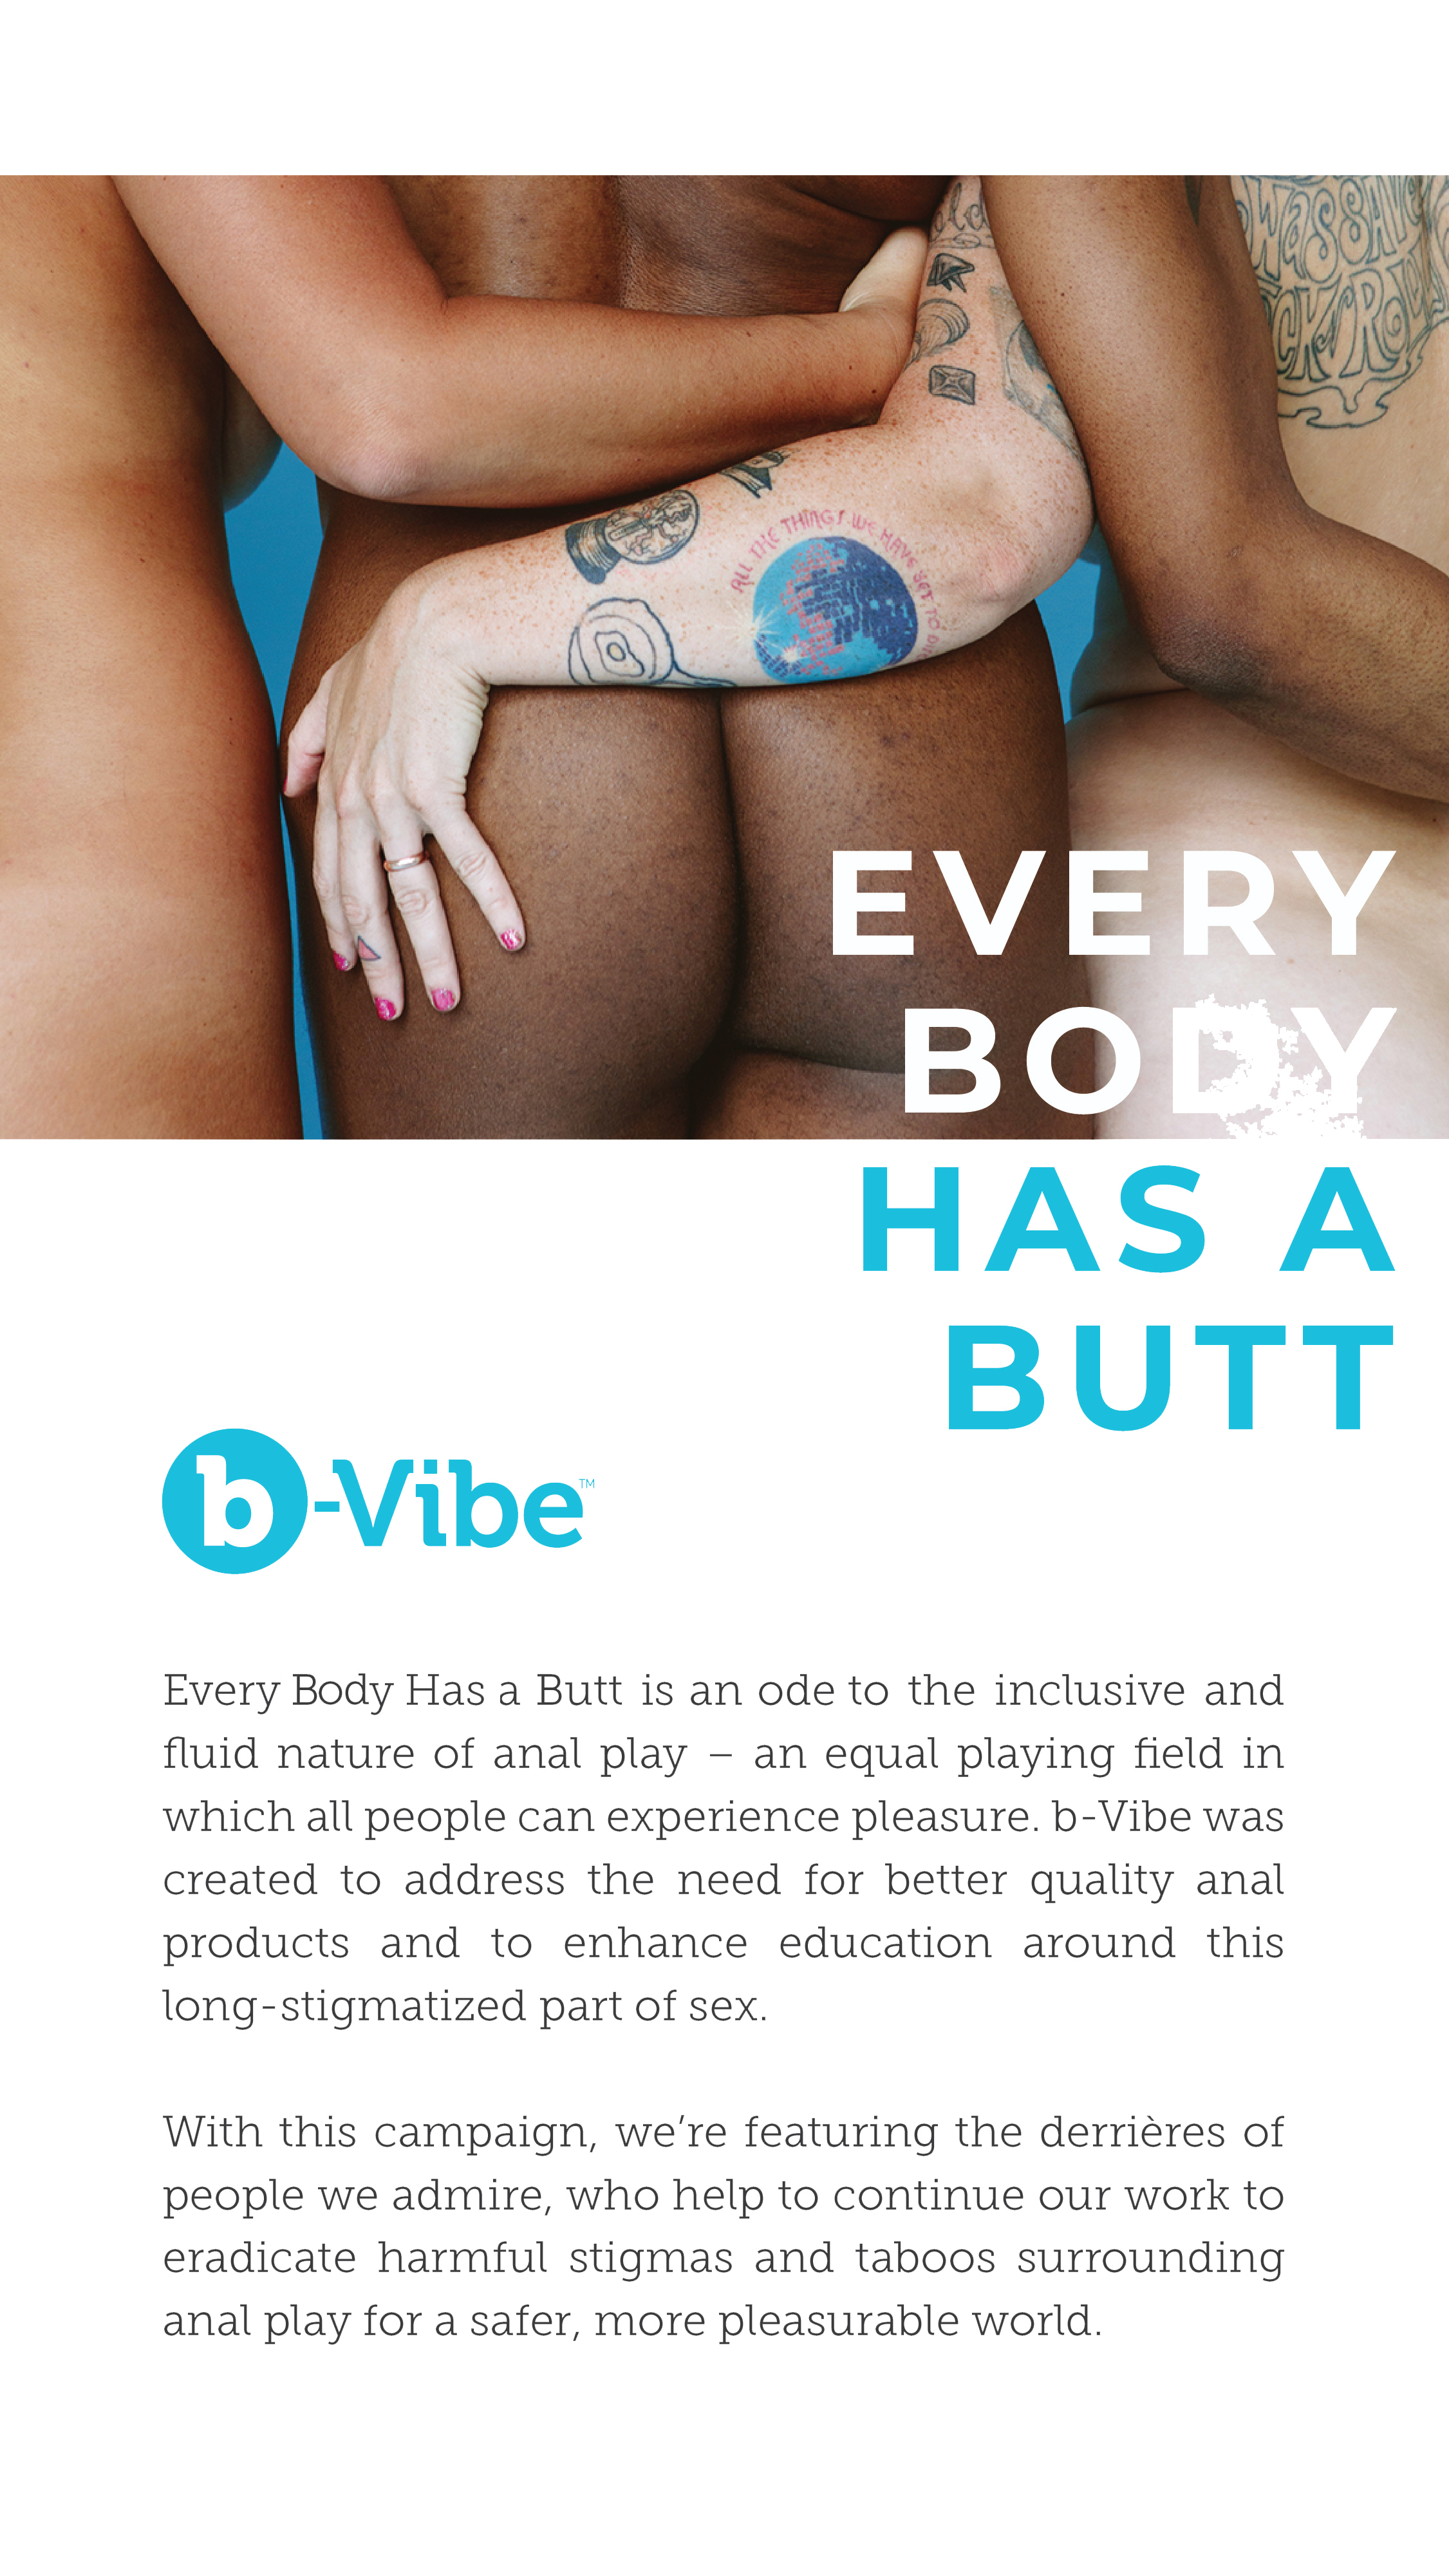 Bvibe butt campaign Instagram Grid_package-10 copy (1).jpg